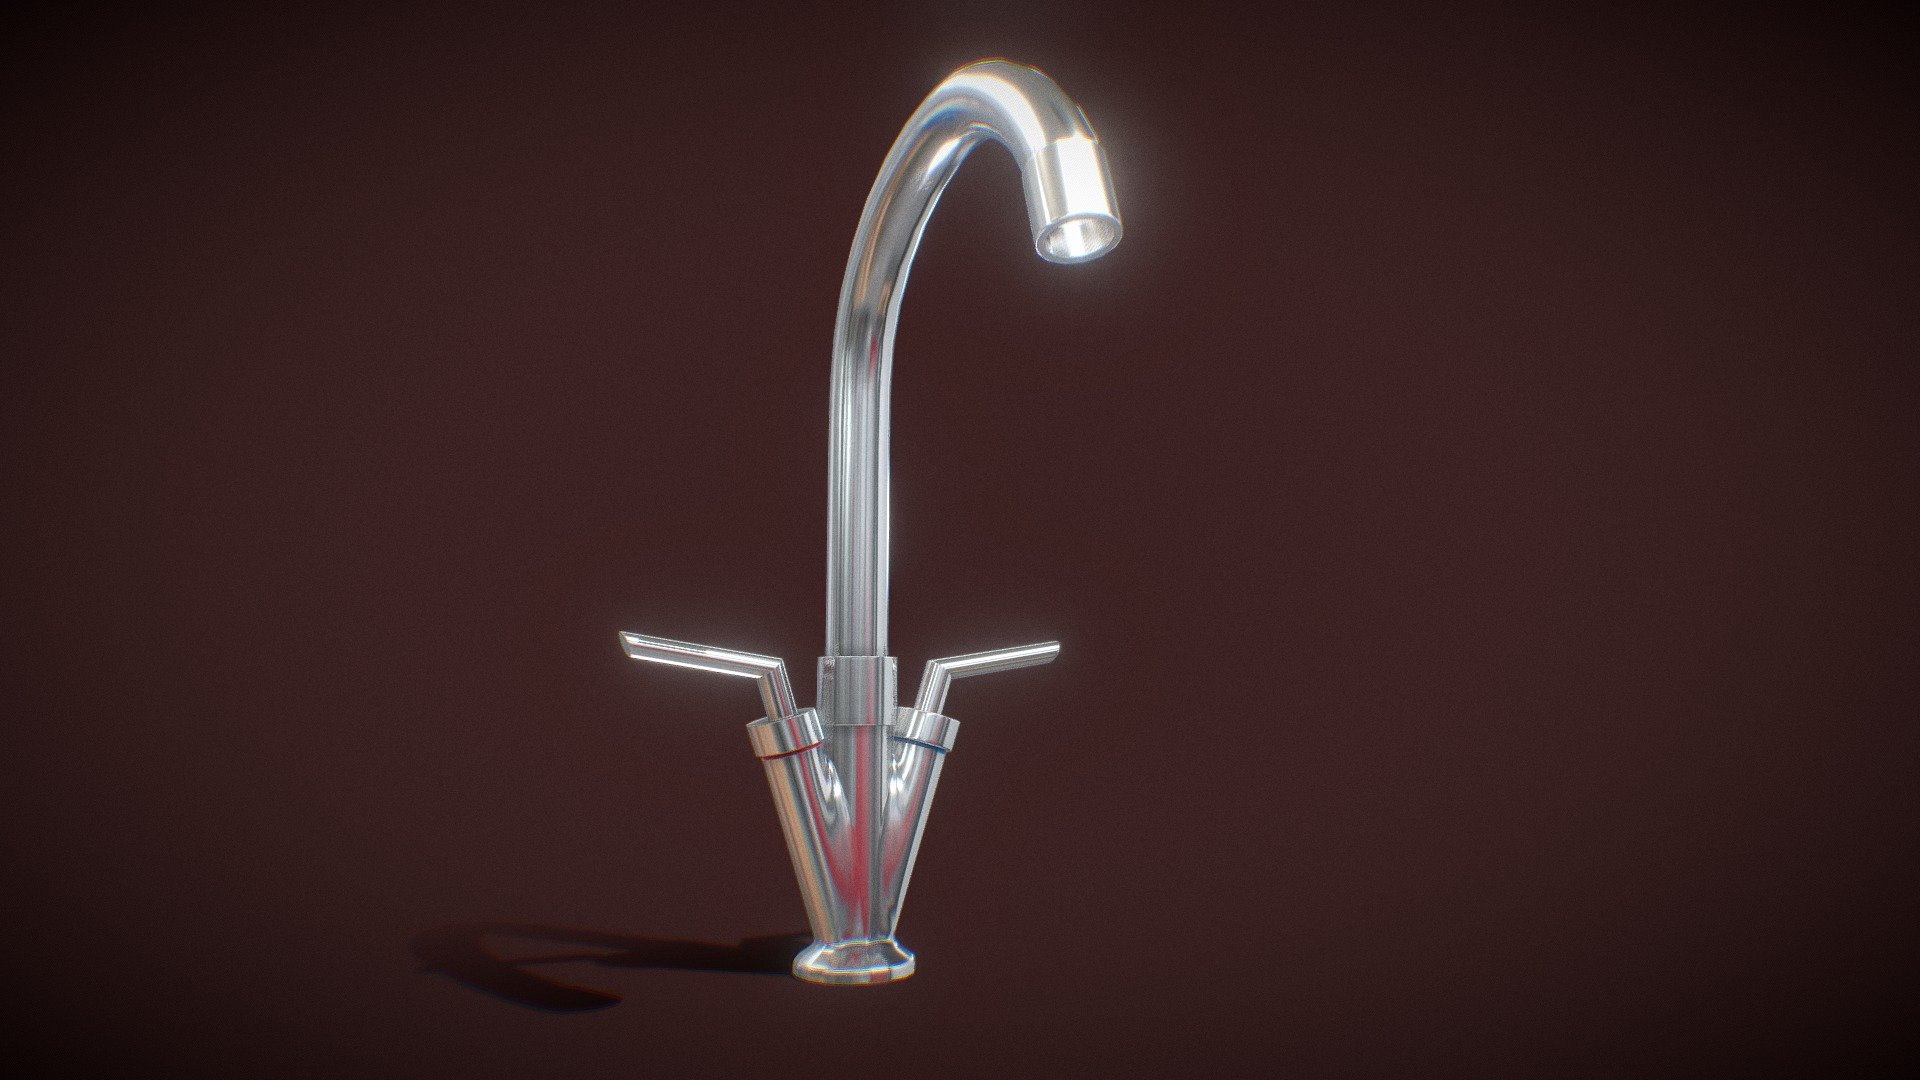 Bath TAP 3d model ready for VirtualReality(VR),Augmented Reality(AR),games and other render engines.This lowpoly 3d model is baked with 4k resolution textures.The PBR_Maps includes- albedo,roughness,metallic and normal 3d model